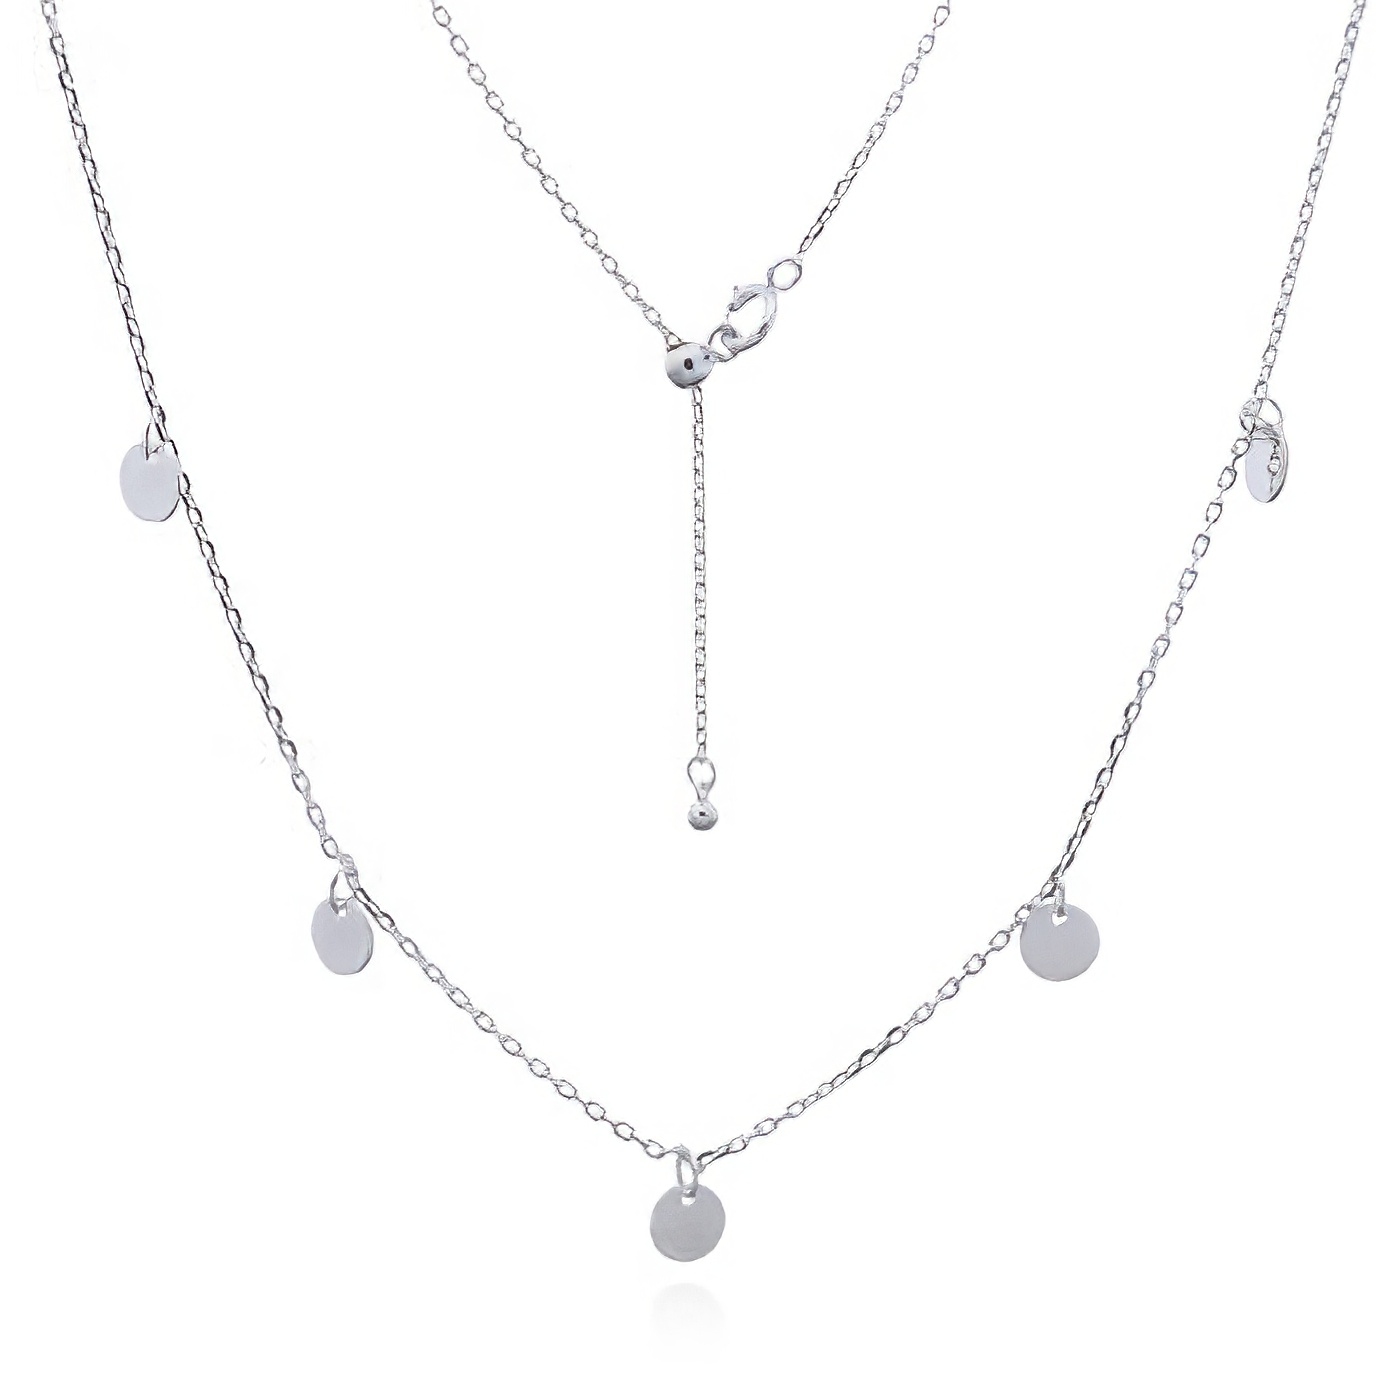 Circle Discs Threaded Silver Plated 925 Chain Necklace